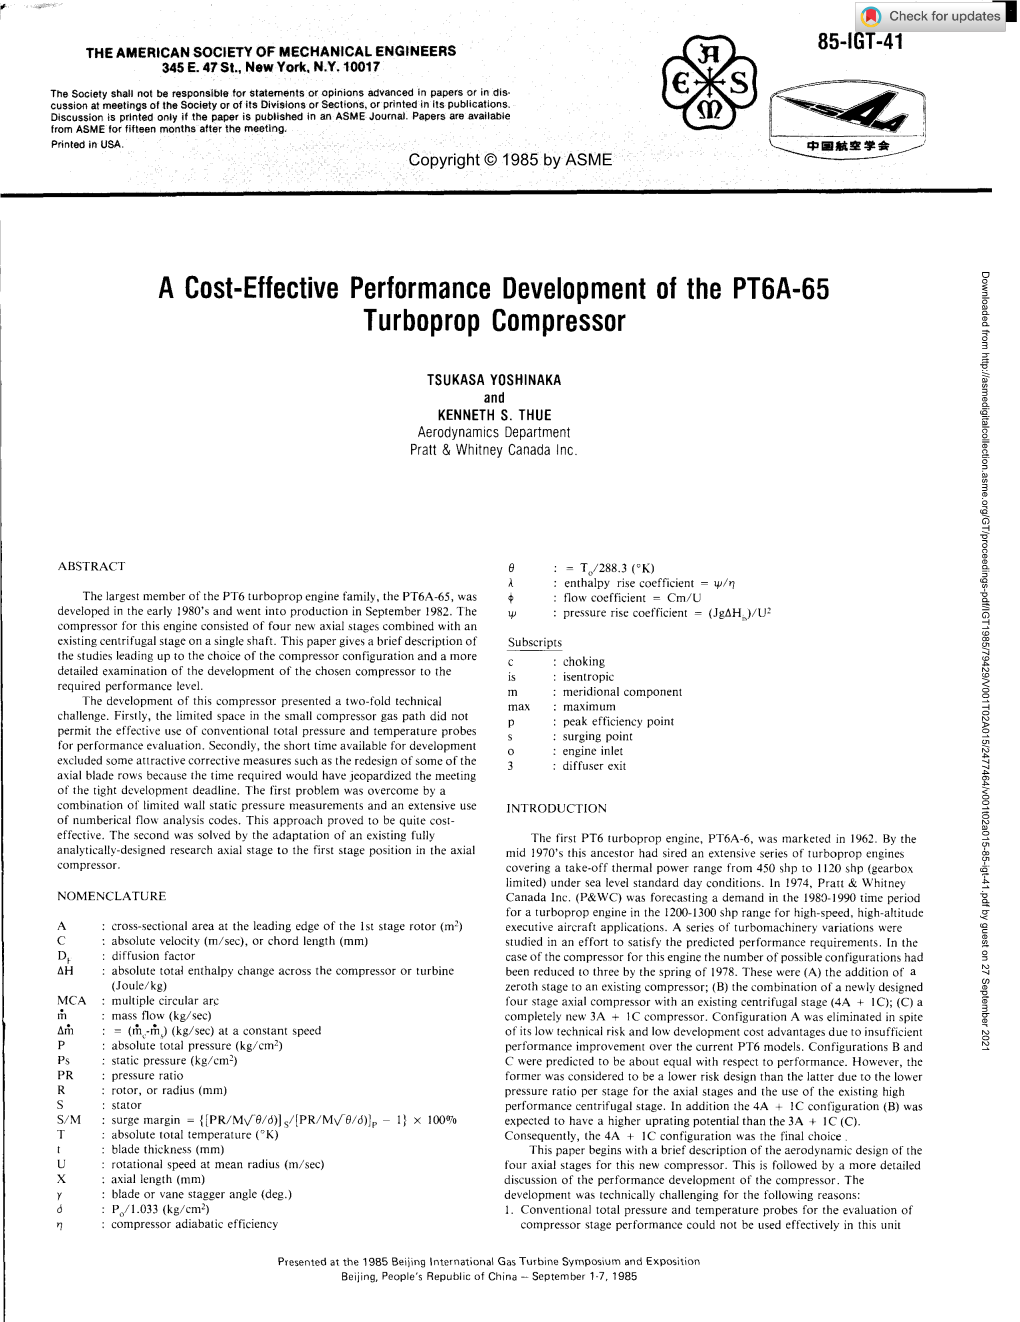 A Cost-Effective Performance Development of the PT6A-65